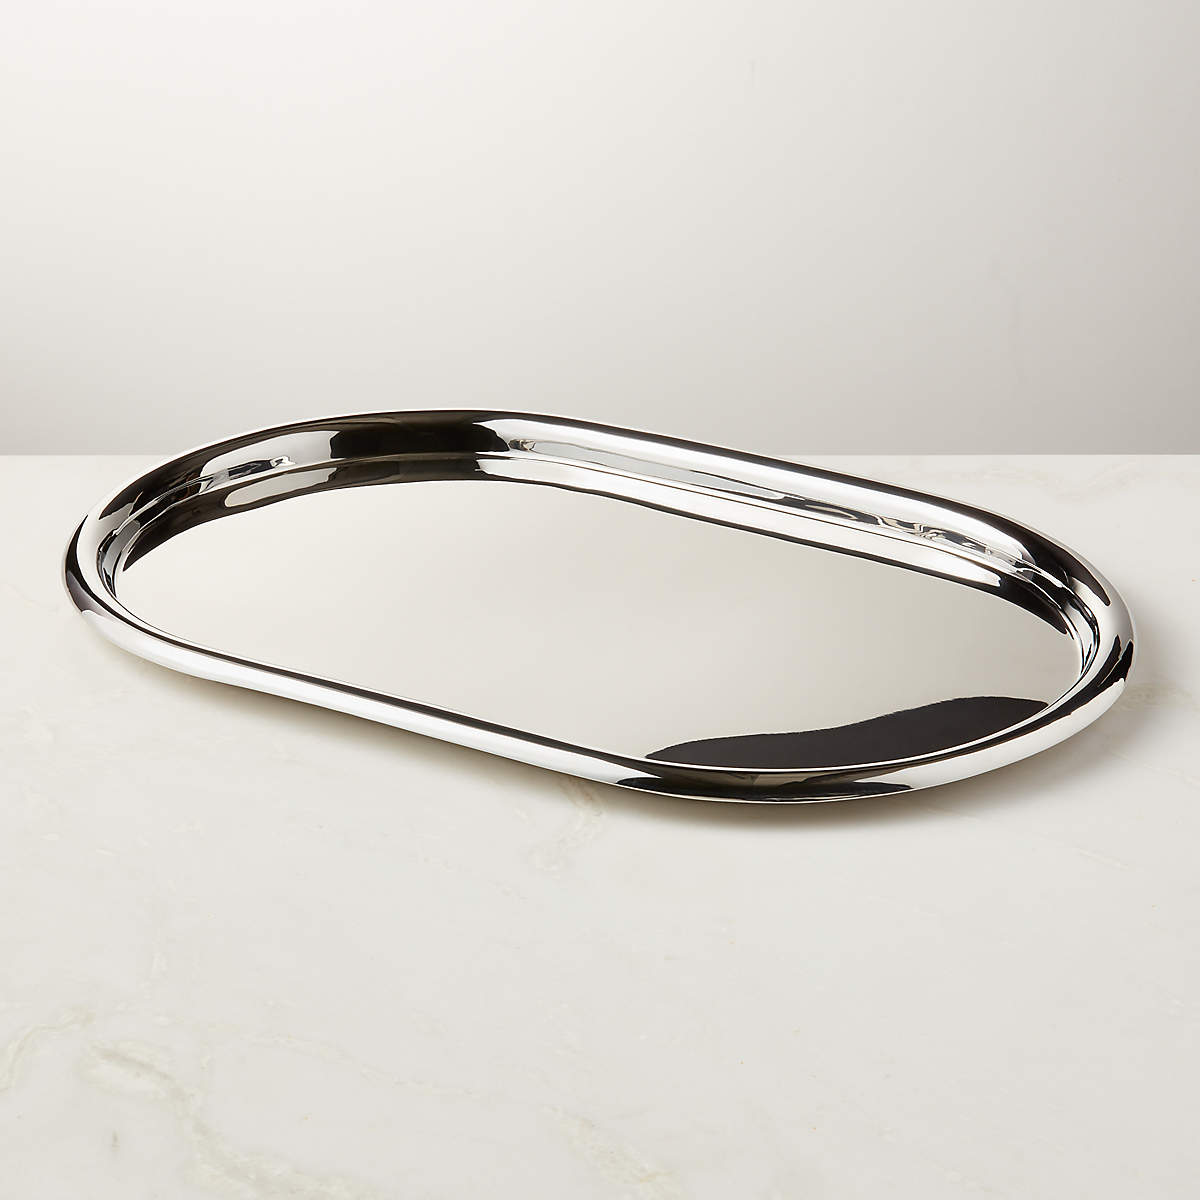 Piero Oval Polished Stainless Steel Serving Tray